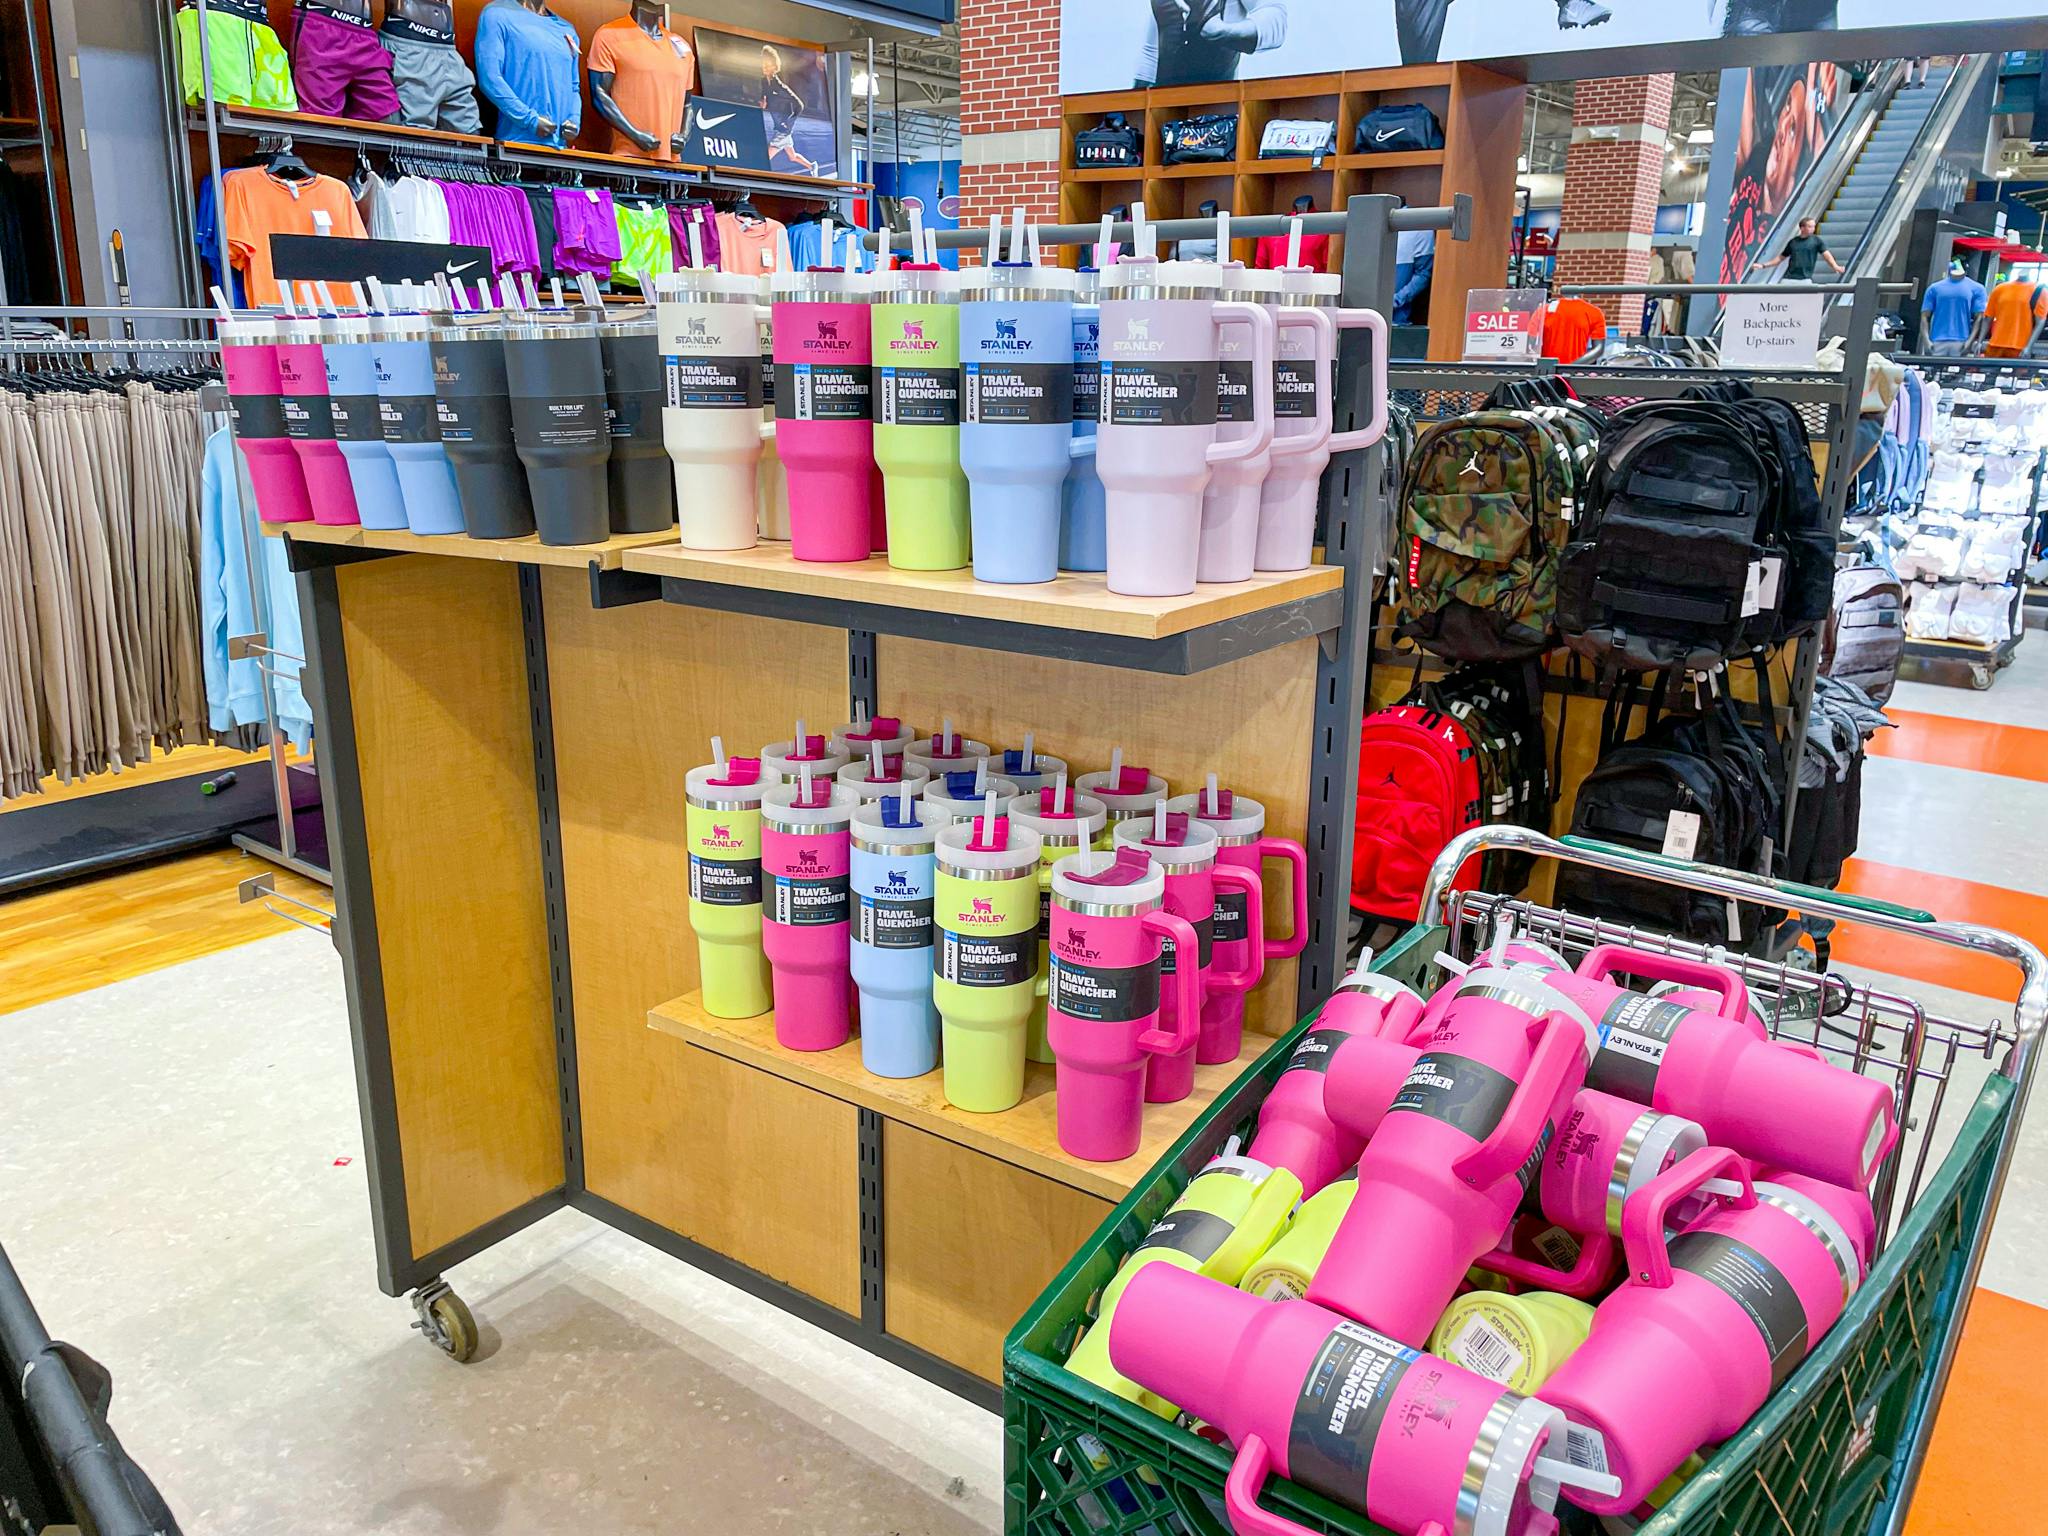 Stanley tumblers in stock at Dick's Sporting Goods on a shelf and in a shopping cart.